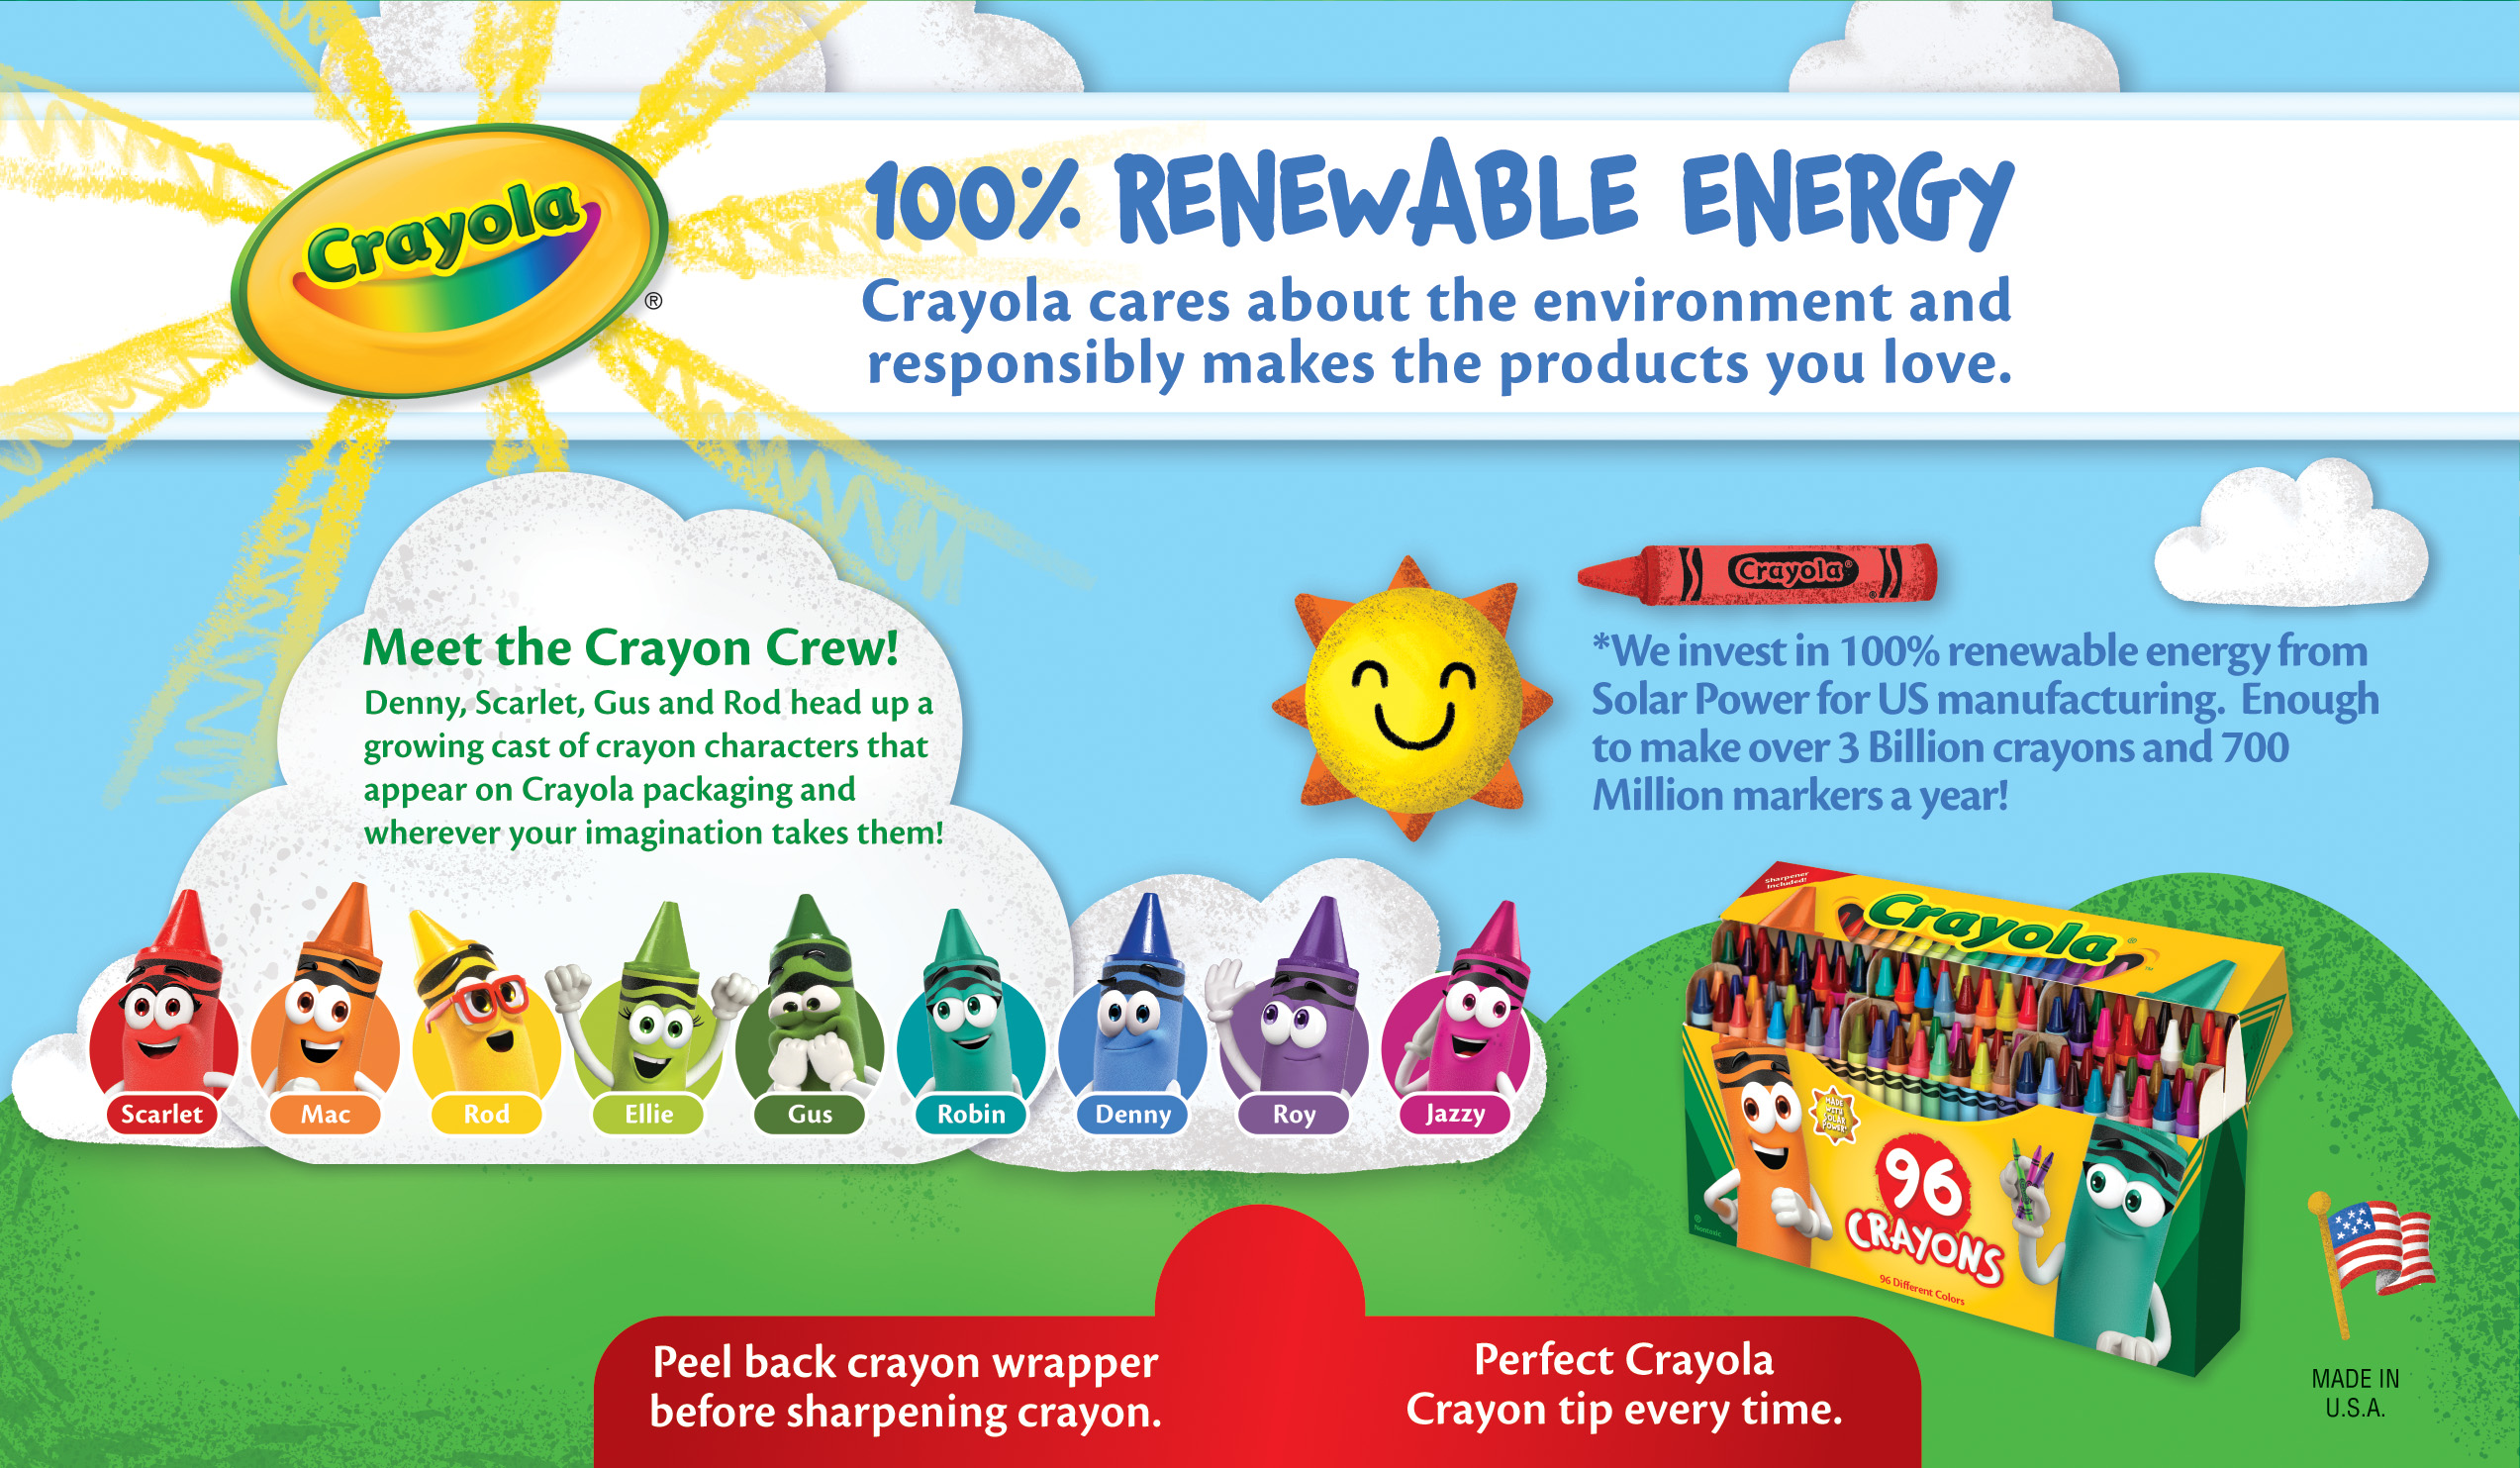 Crayola Crayon Set, 96-Colors, School Supplies, Art Gifts for Kids - image 3 of 12